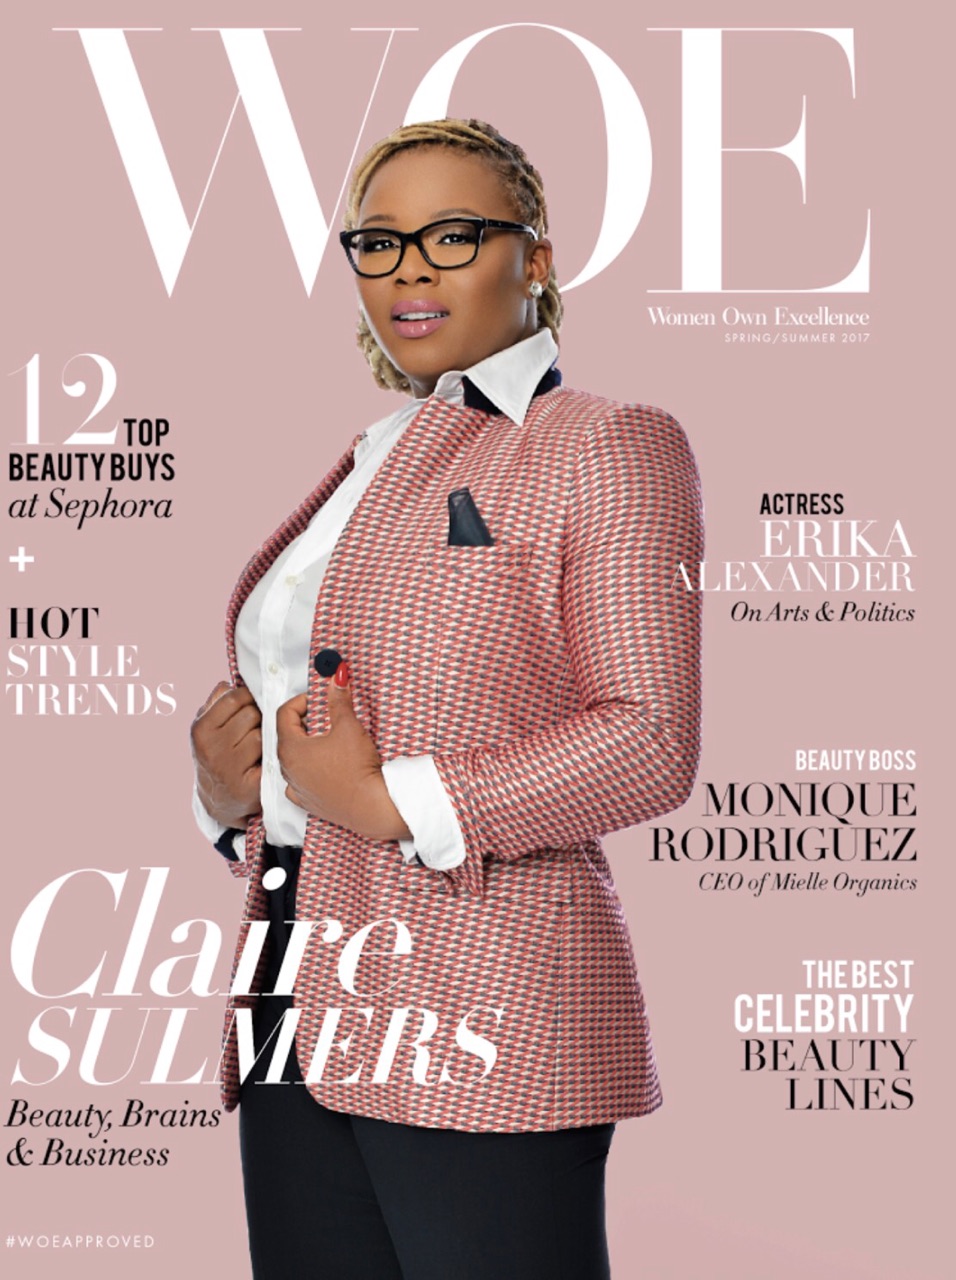 woe-magazine-conversations-with-claire-sulmers-fashion-bomb-daily